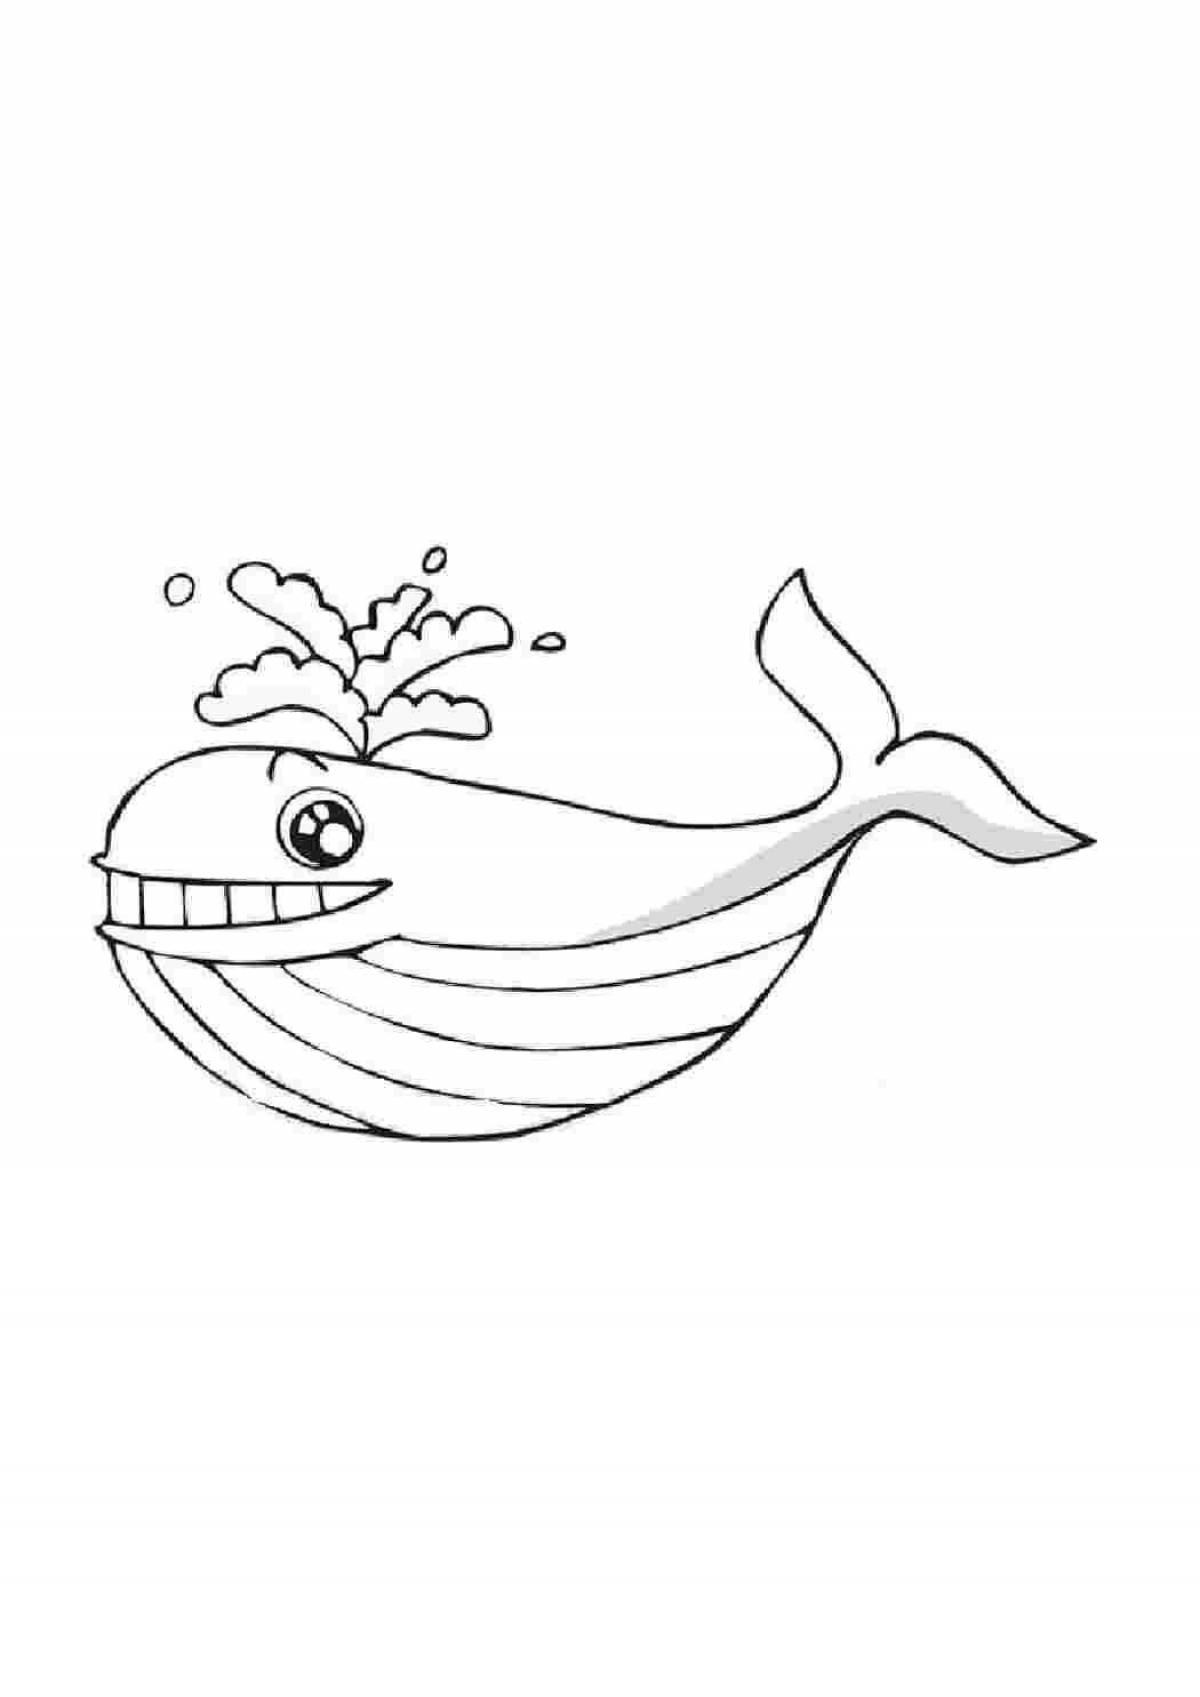 Adorable whale drawing coloring book